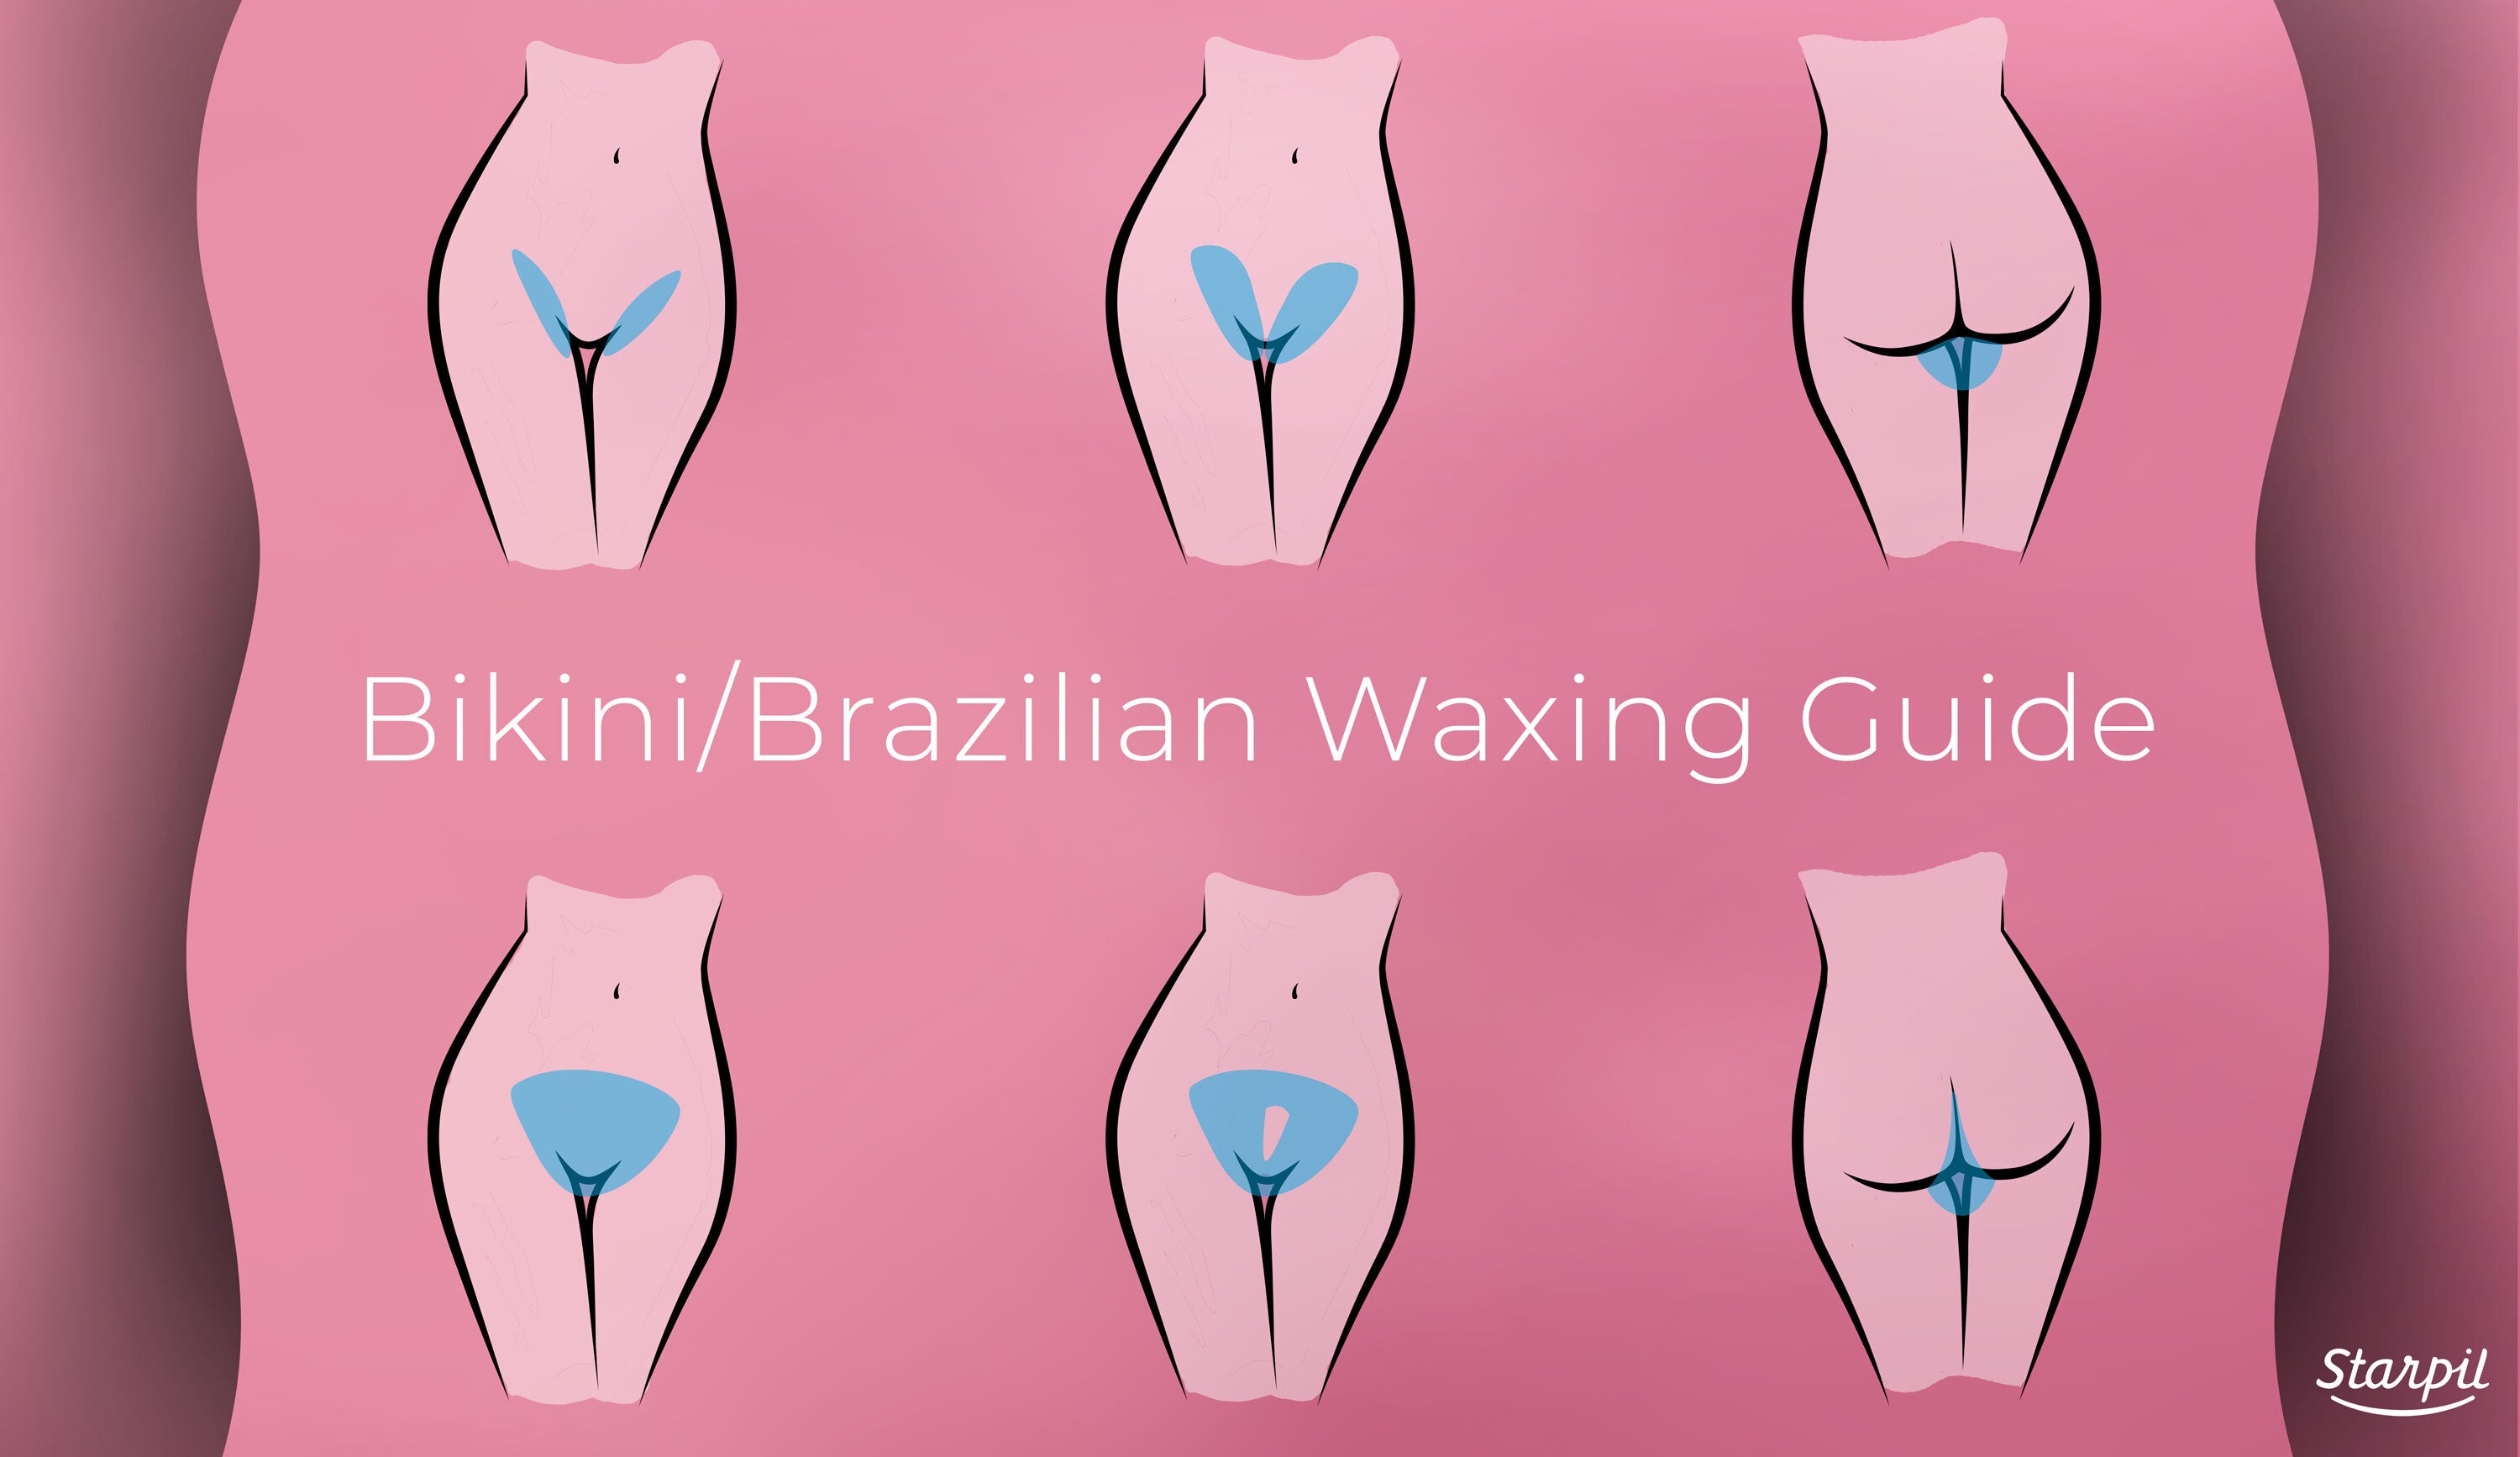 alexander mark smith recommends brazilian waxing at home video pic